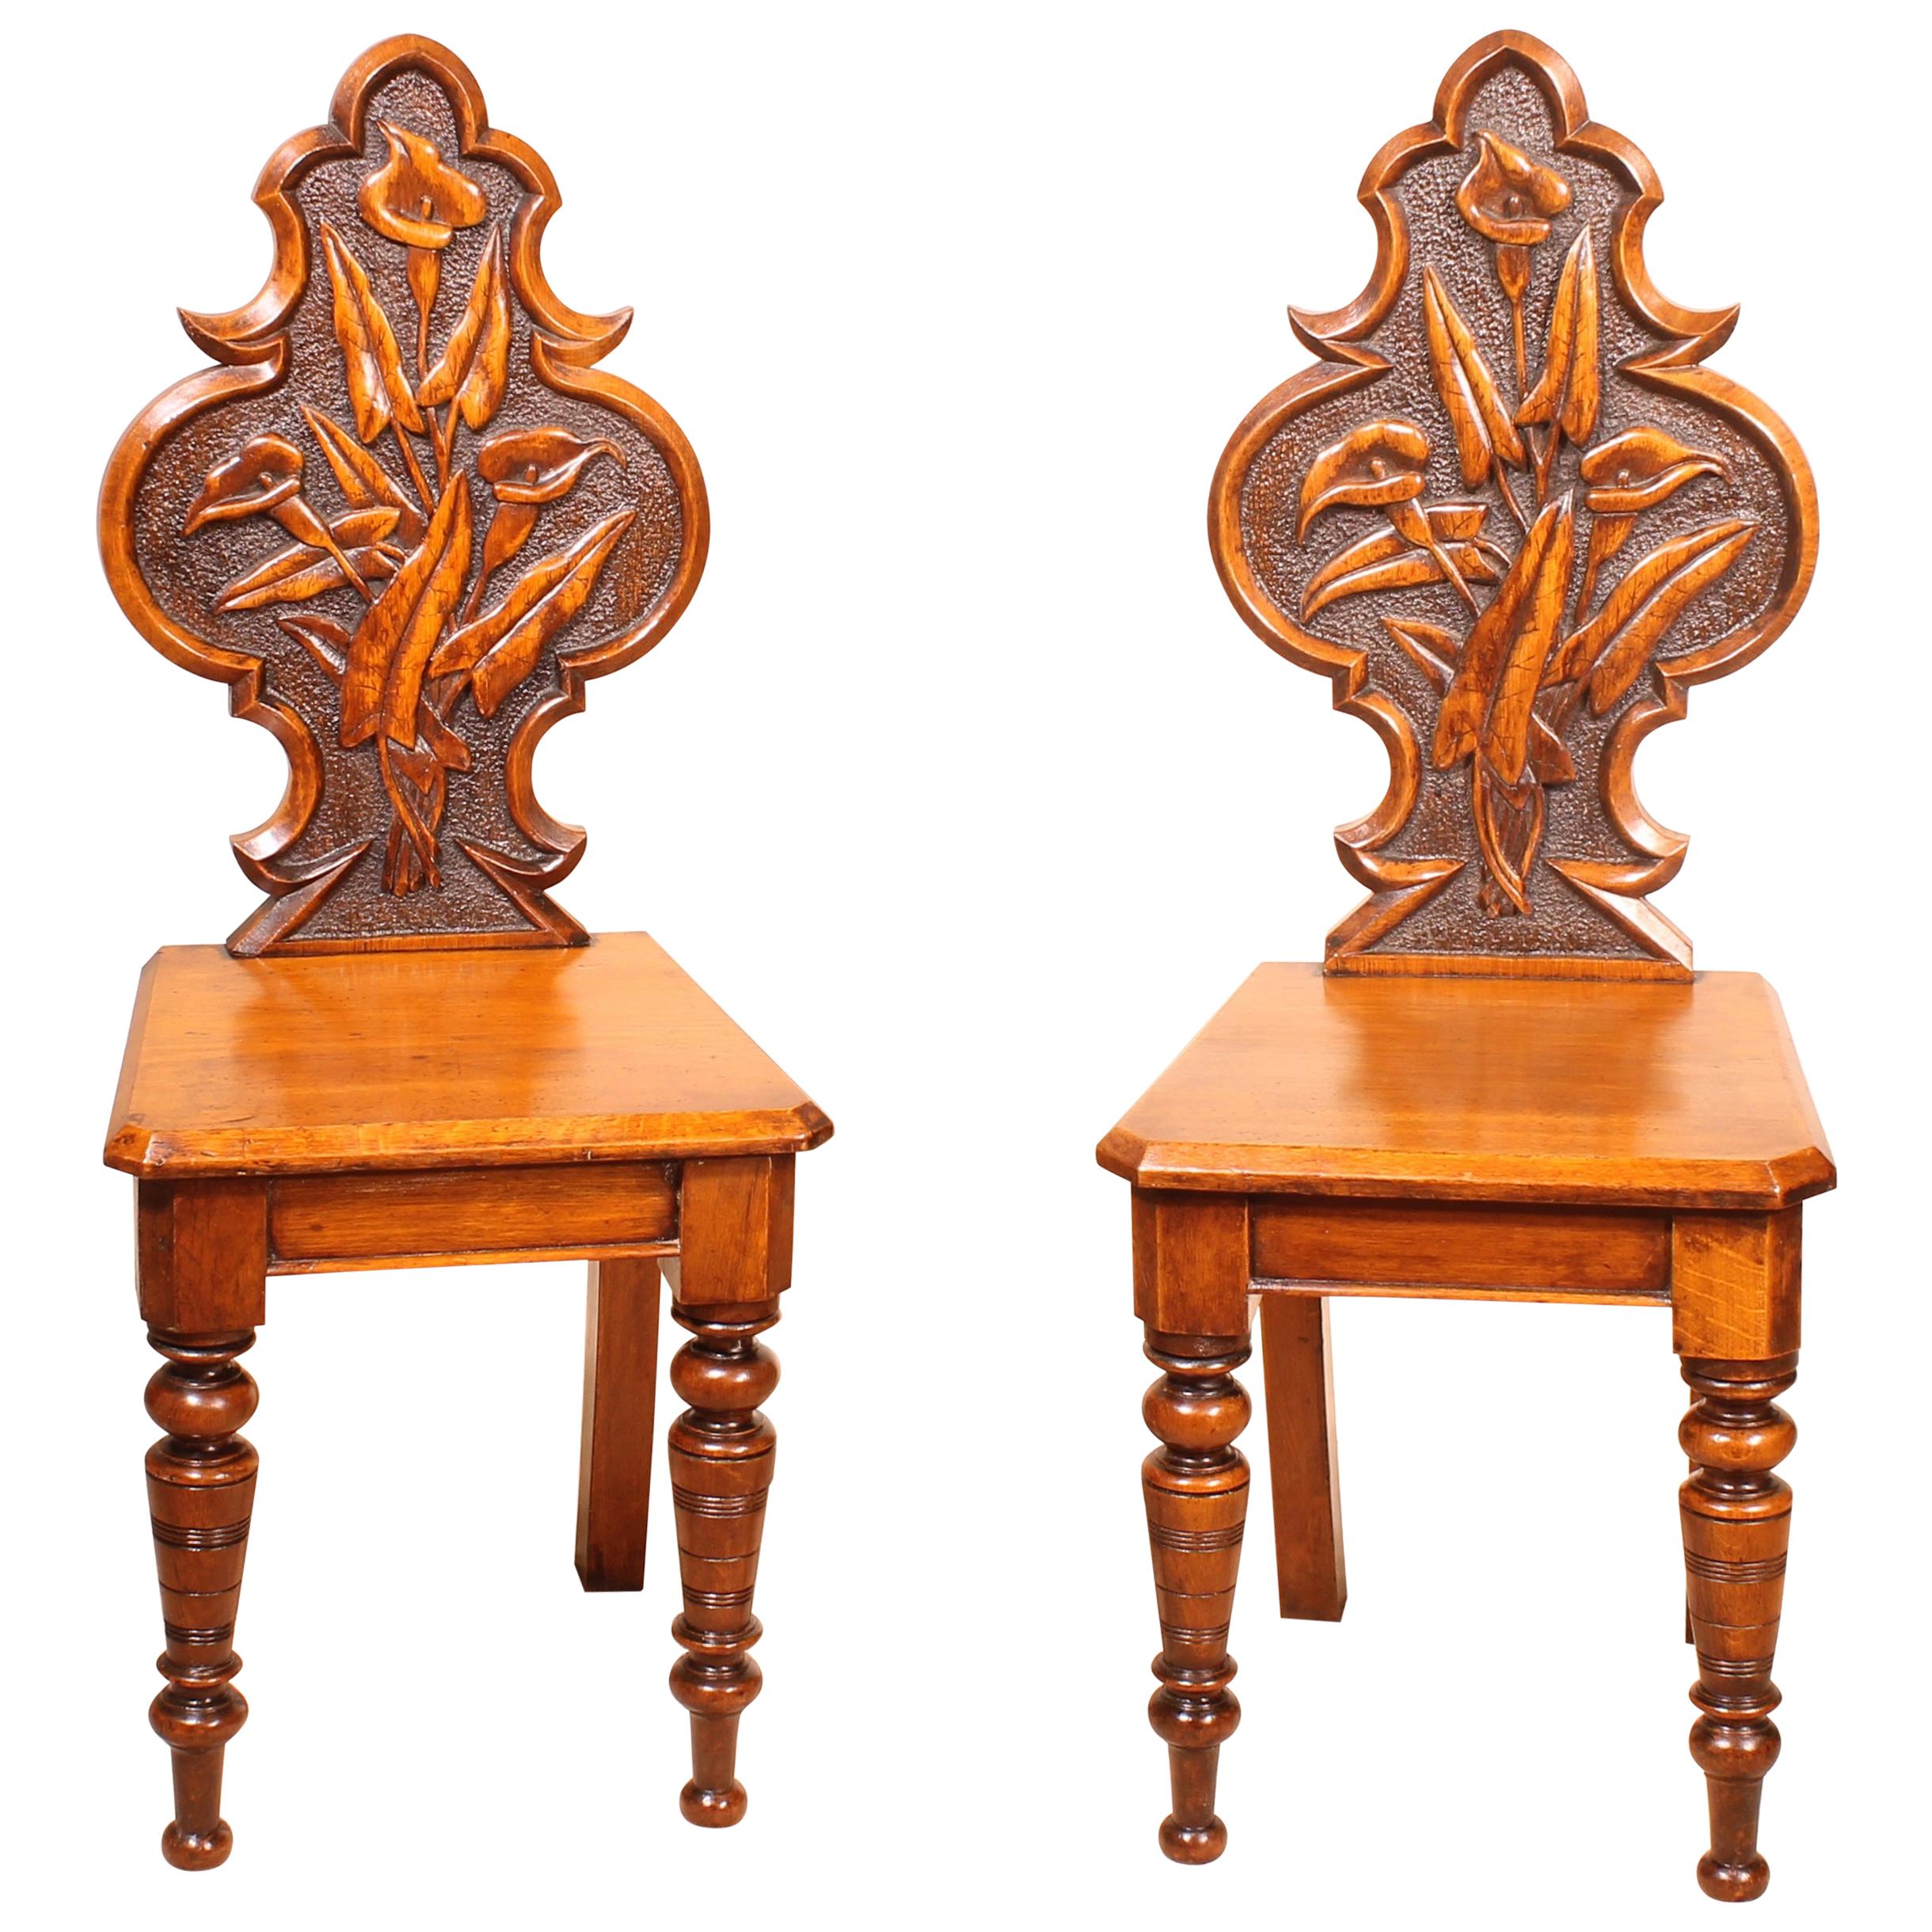 Pair of Hall Chairs Art Deco, Early 20 Century, England